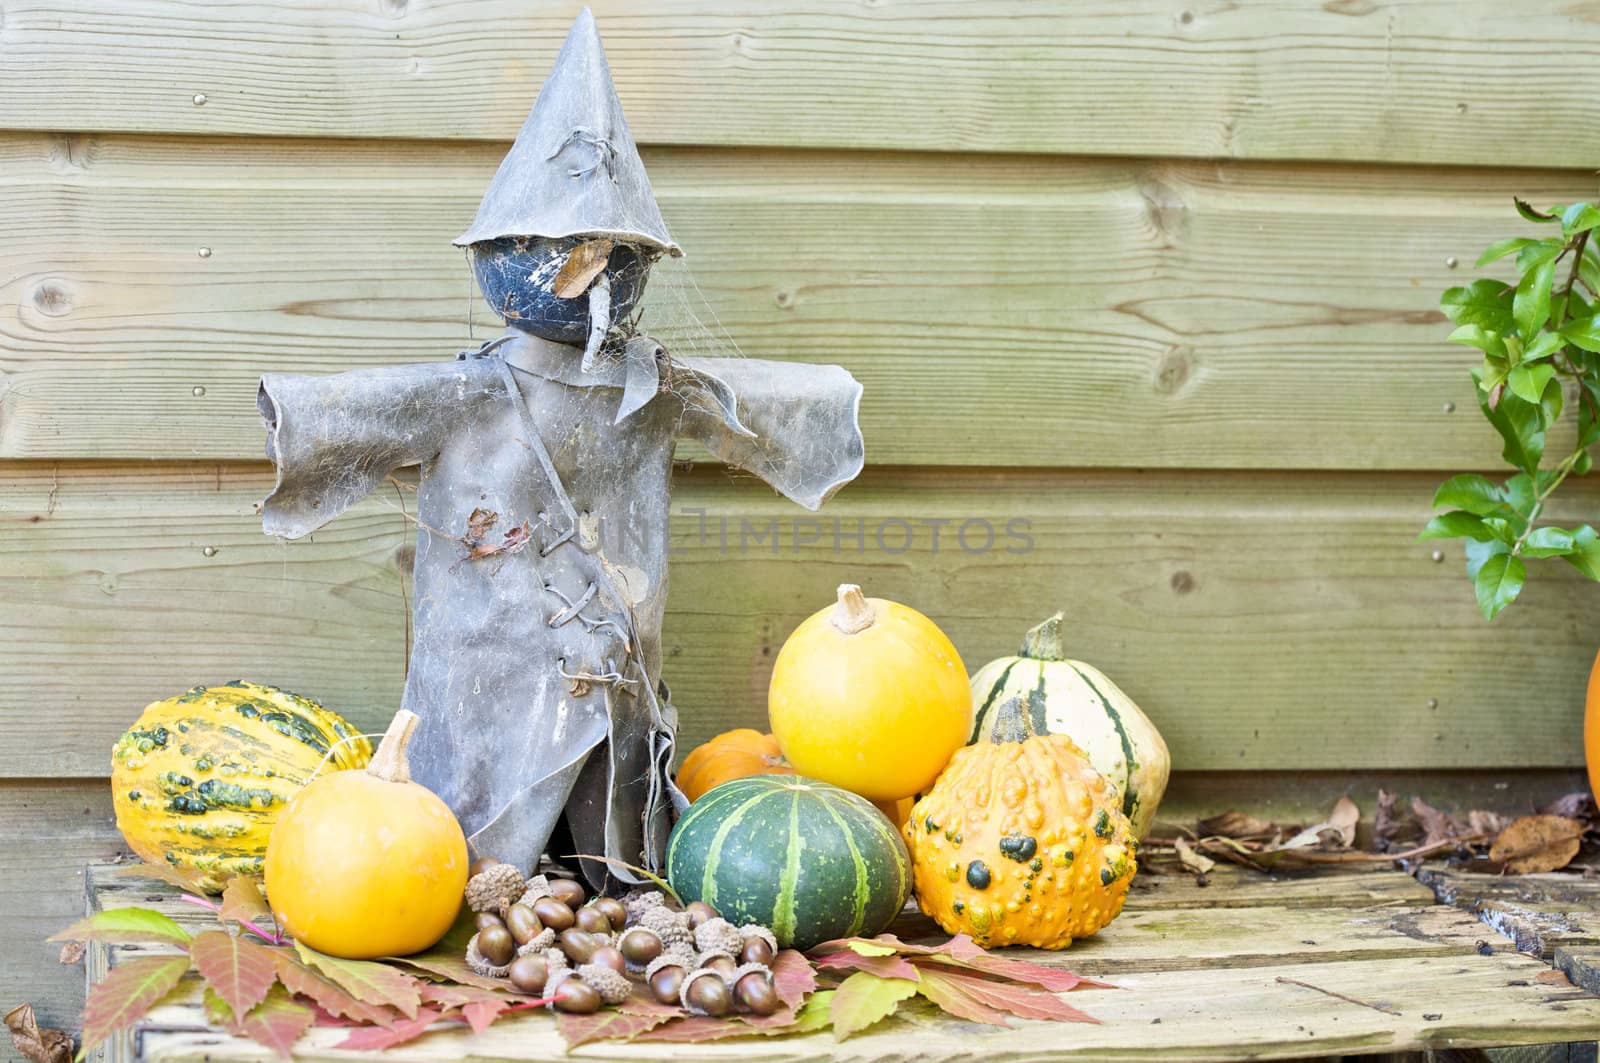 Tin scarecrow covered in spiderwebs and surrounded by pumpkins